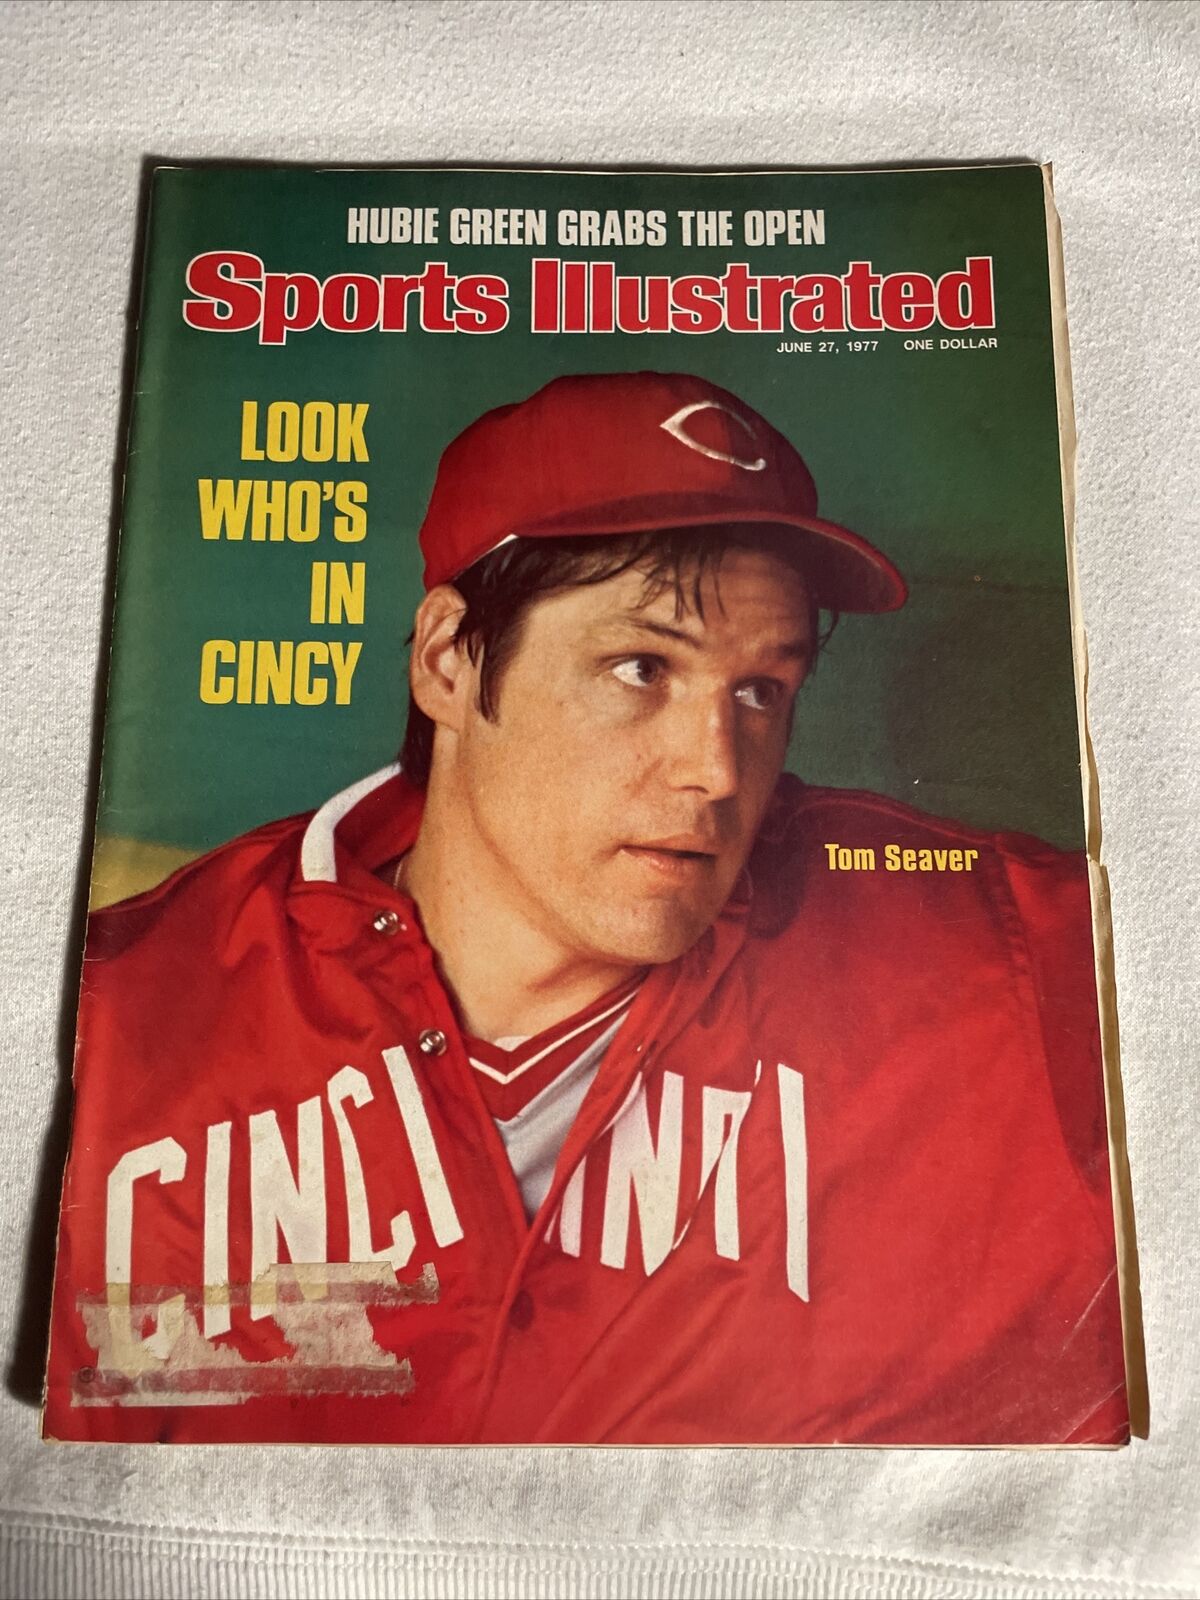 1977 June 27 Sports Illustrated Magazine, Look who’s in Cincy   (CP246)